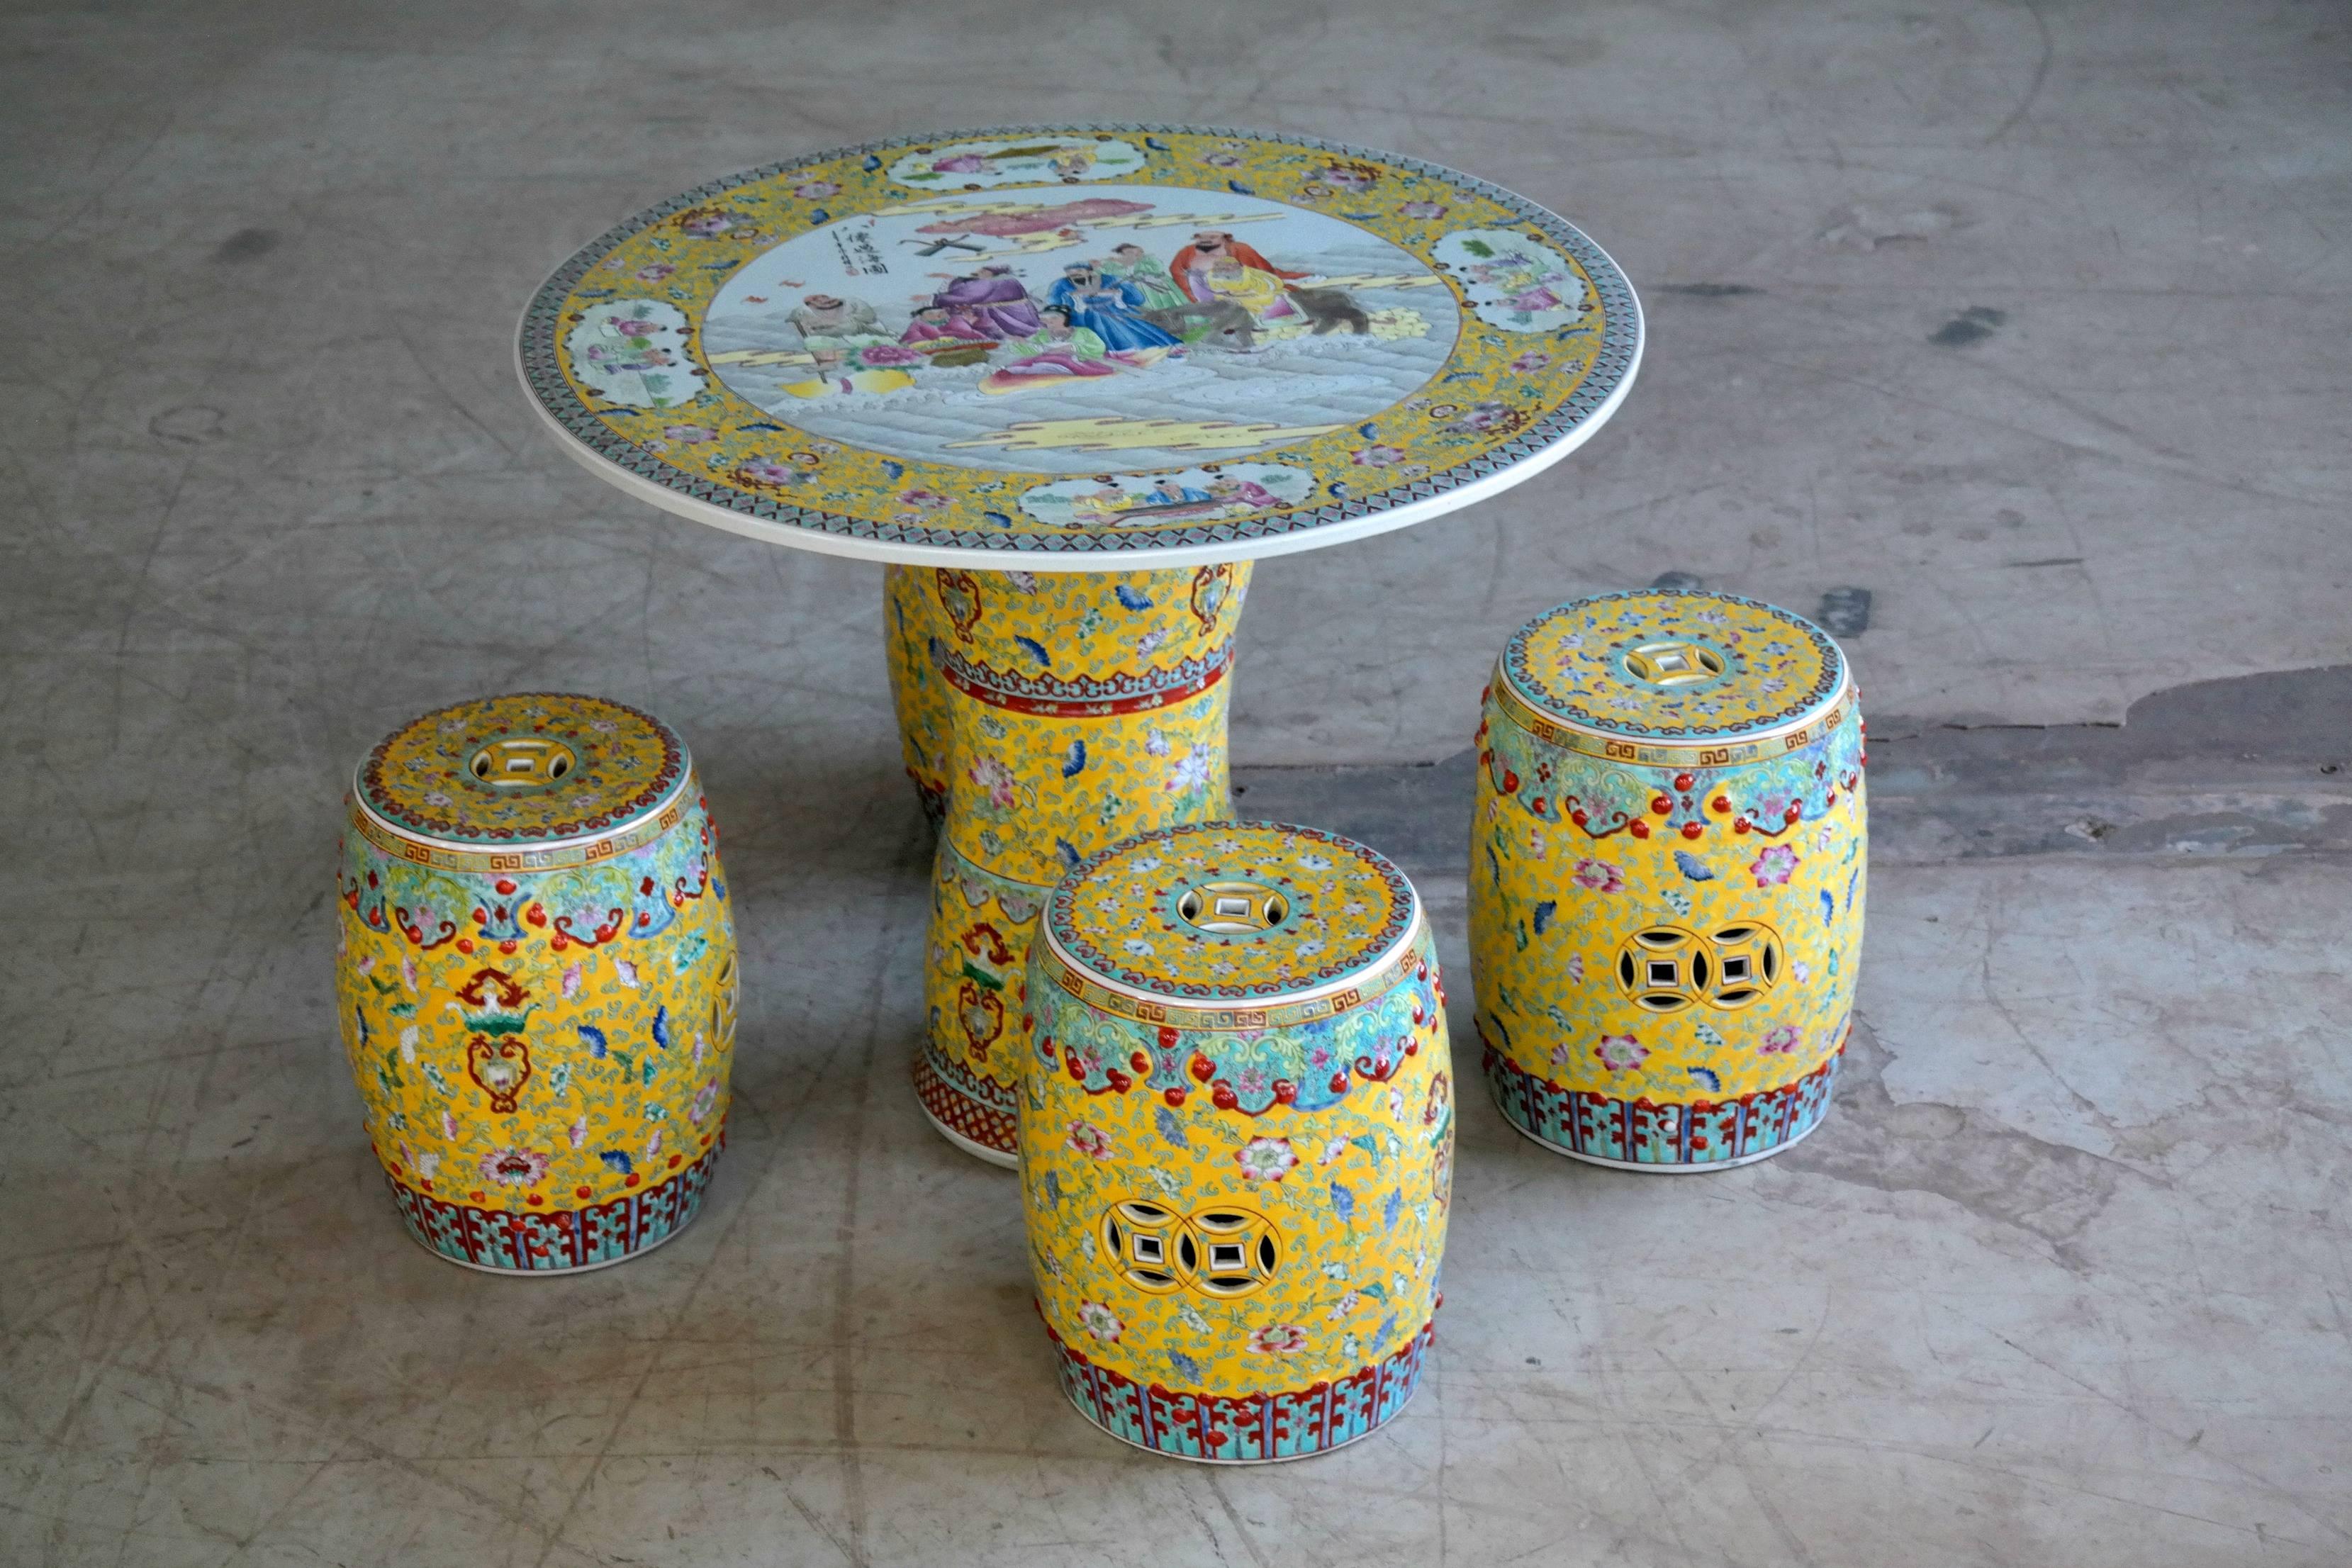 Very beautifully executed hand-painted garden set in vibrant colors. Signed by artist on top as part of the imagery. C.